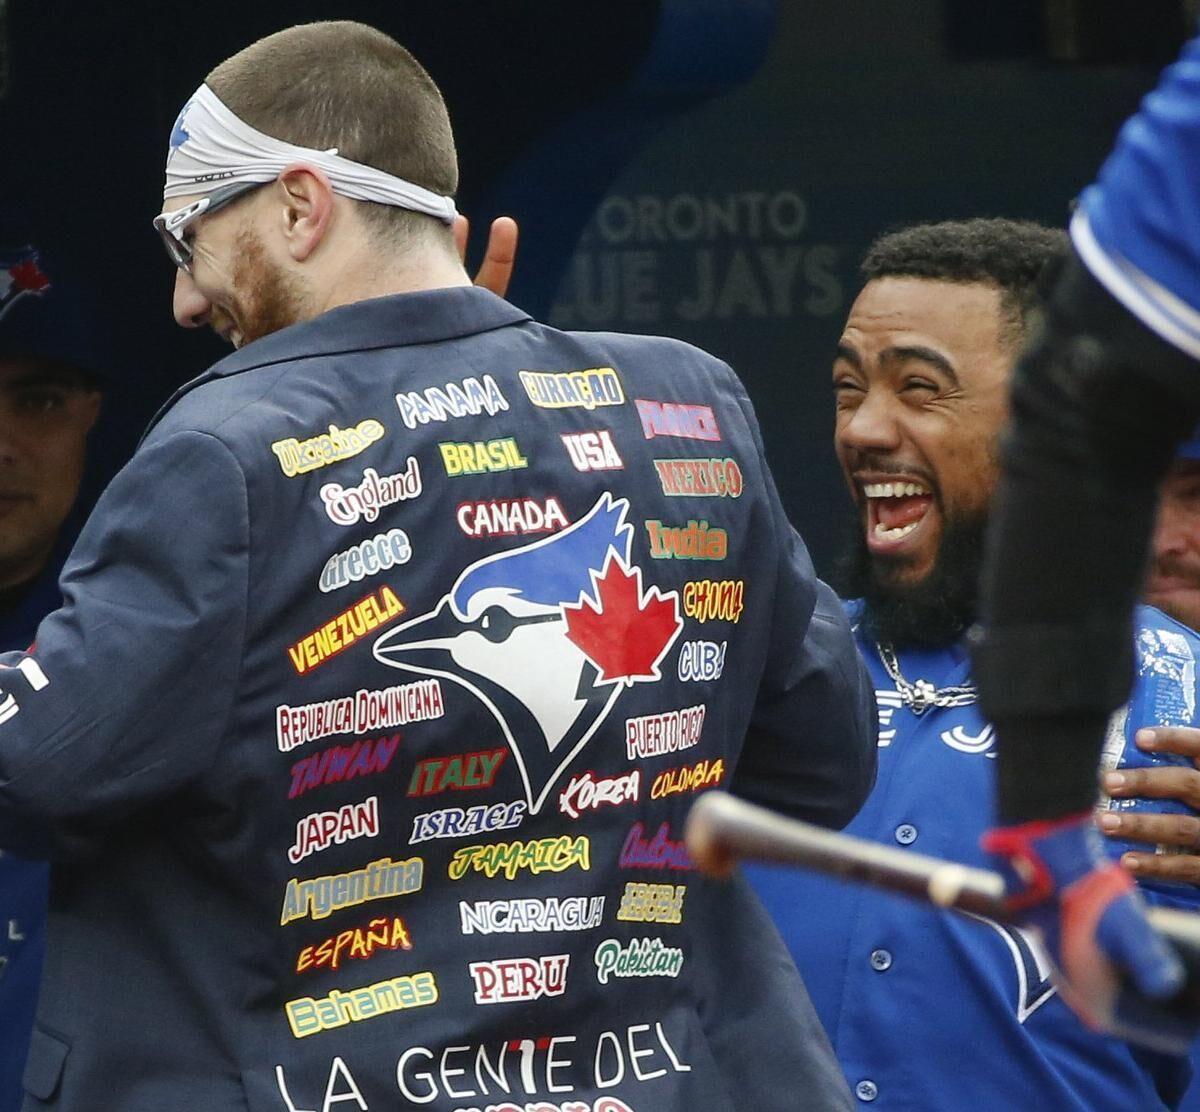 A fan wearing a Toronto Blue Jays jersey holds a sign for